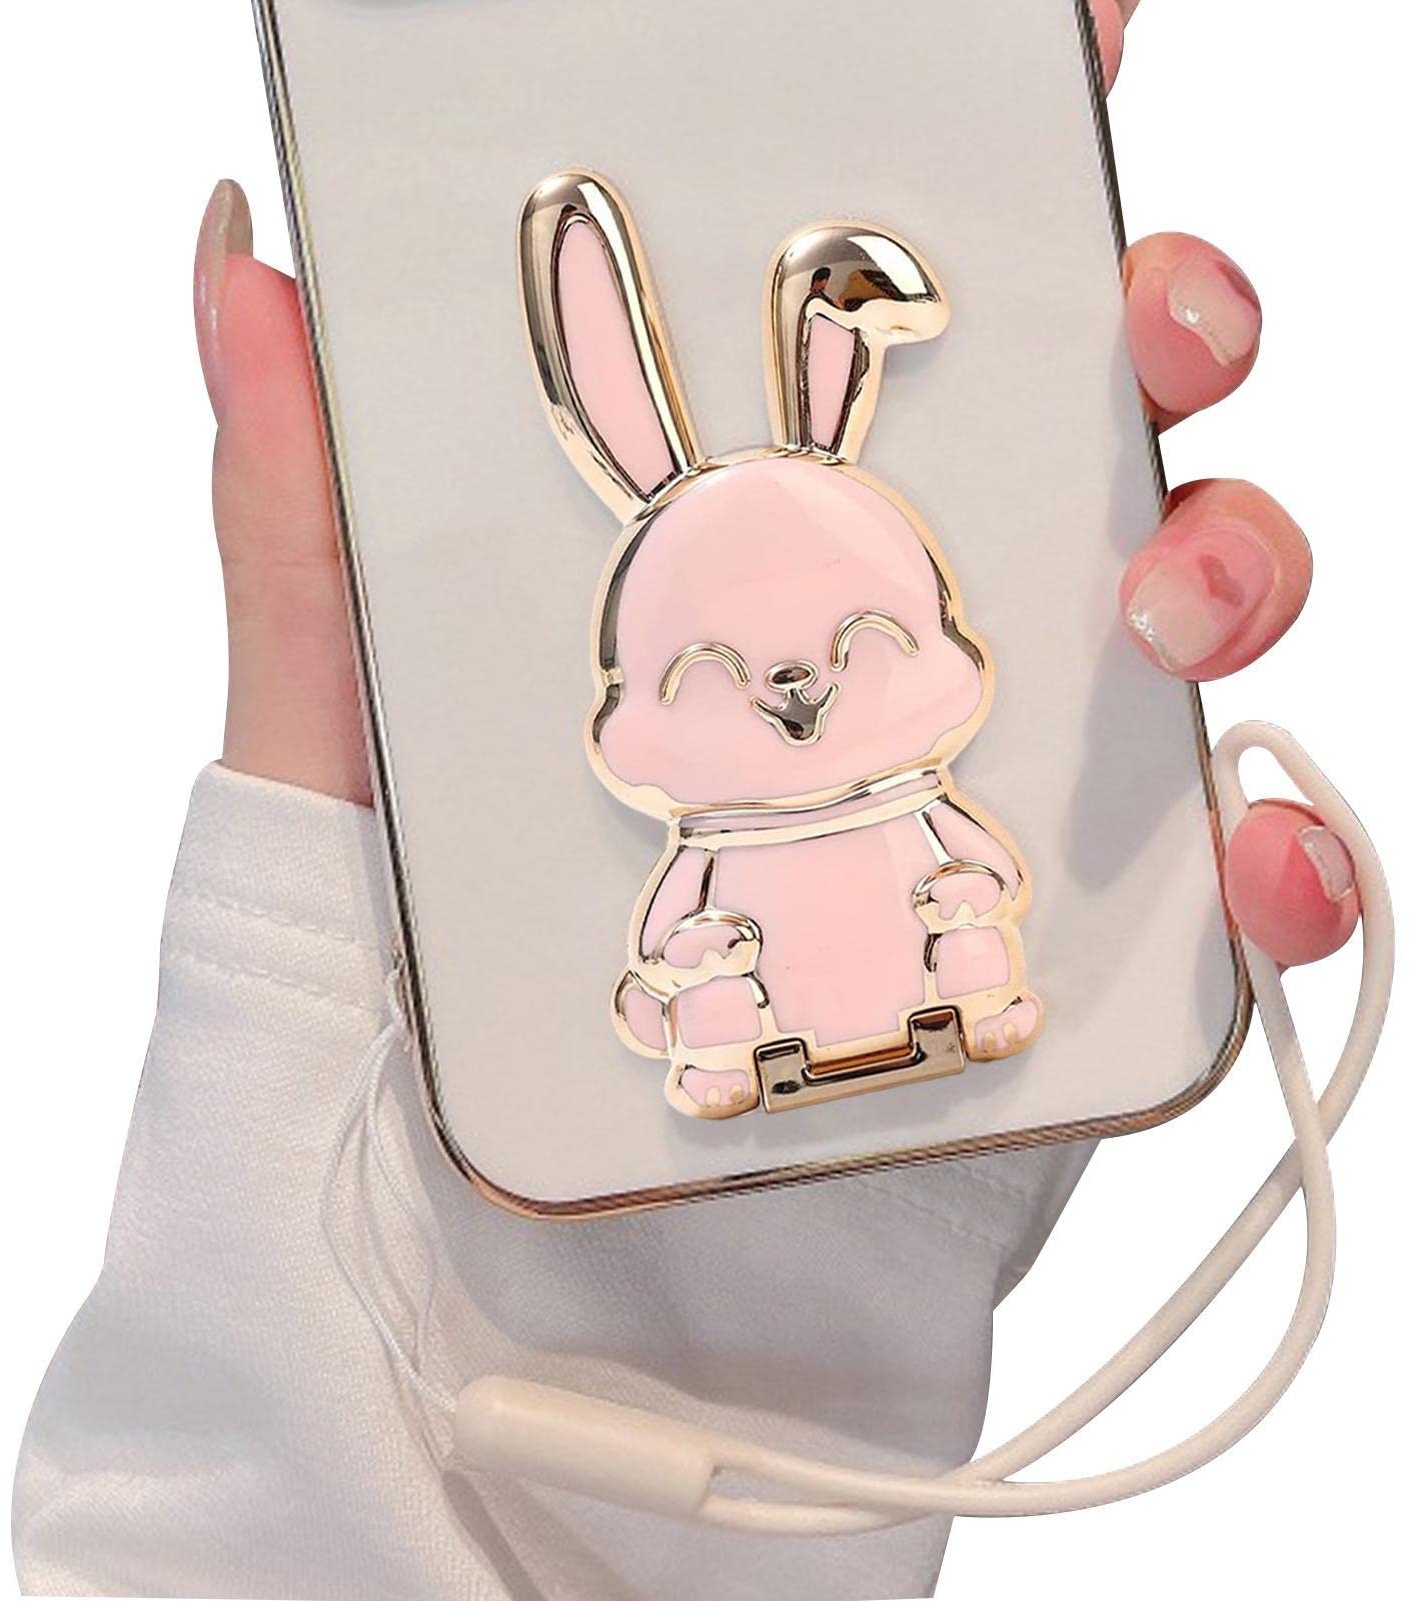 Bunny Phone Stand,Foldable Desk Phone Stand - Adjustable Cute Phone Stand for Desk for All Mobile Phones Tablets Pewell